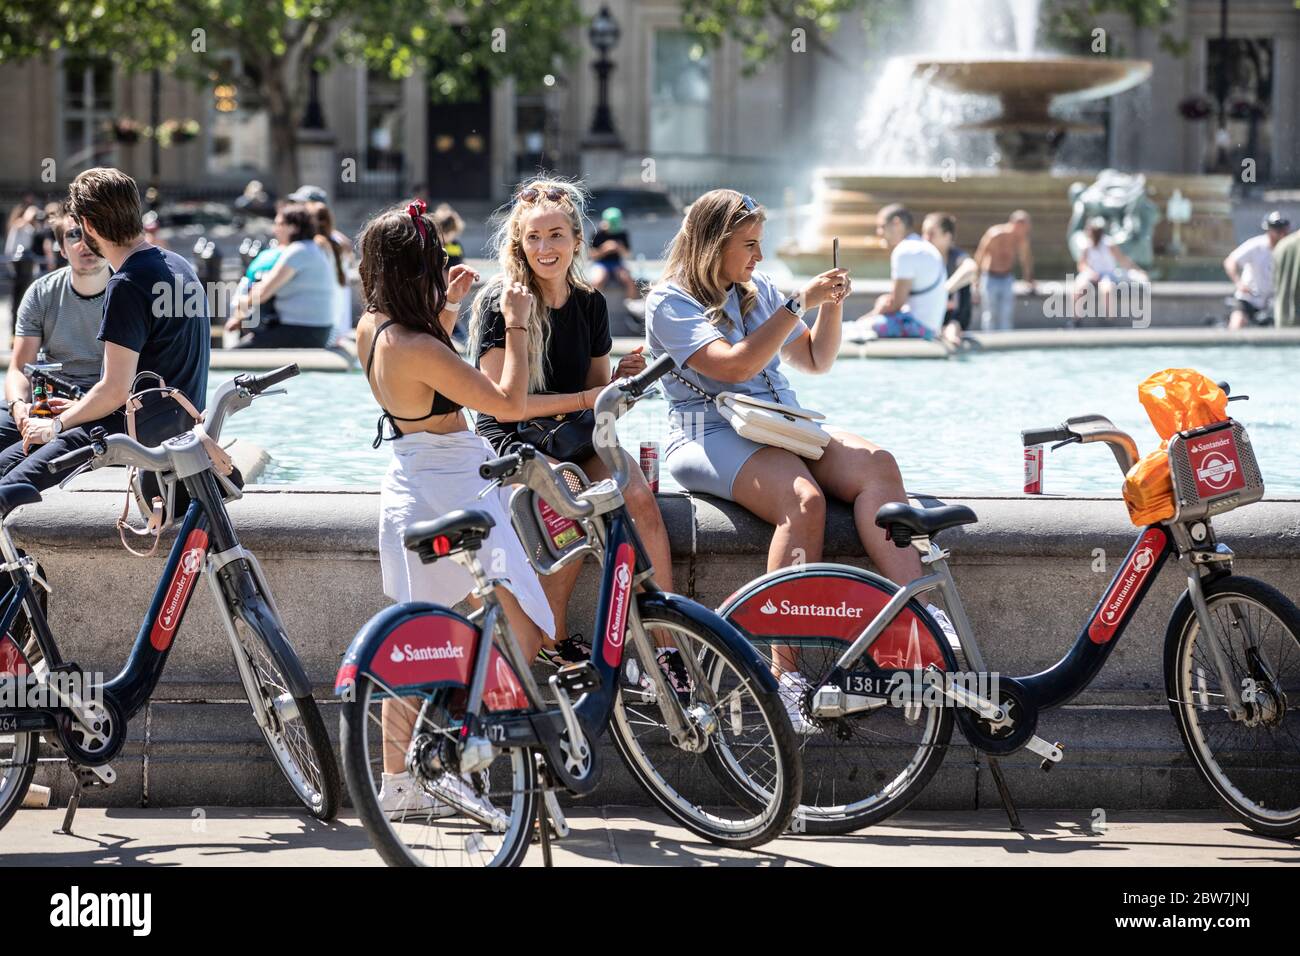 London, UK. 30th May, 2020. Tourists and Londoner's enjoy the sunshine whilst sitting at the fountains in Trafalgar Square, London, UK. 30th May, 2020. Trafalgar Square London, England, UK Credit: Clickpics/Alamy Live News Stock Photo